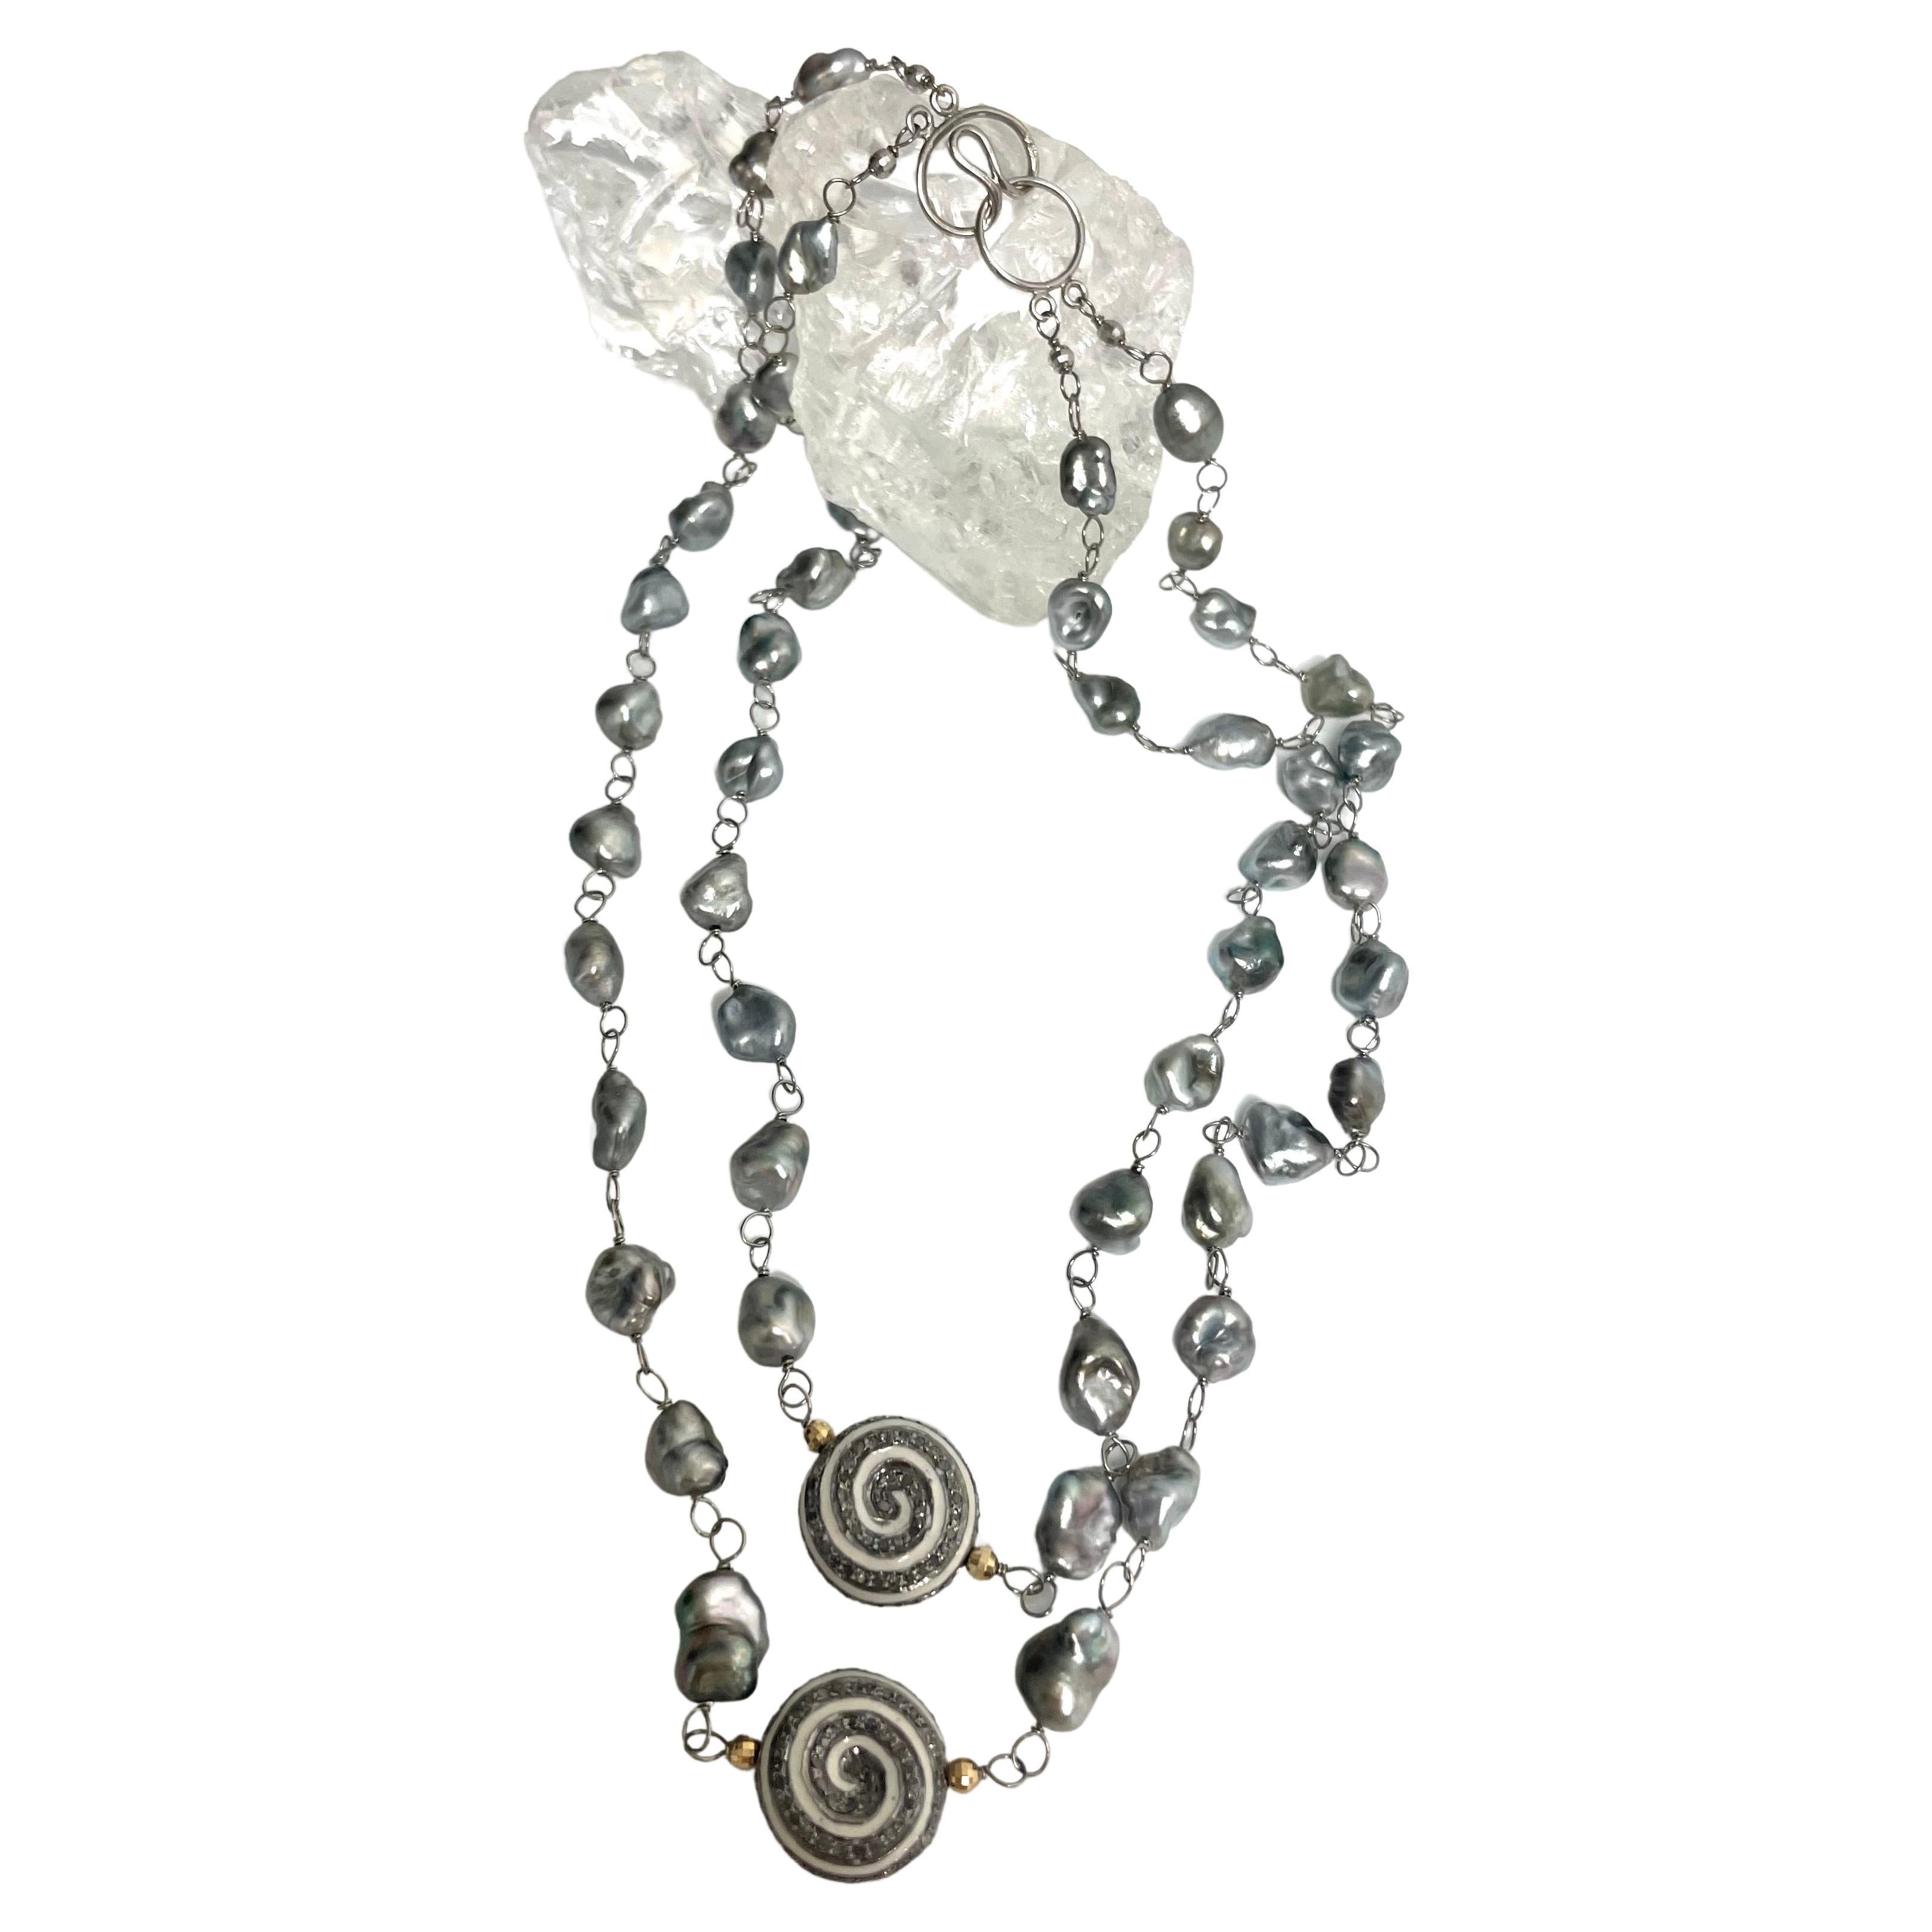 Tahitian Keshi Pearl Necklace with Enamel and Pave Diamond Pinwheel Accents In New Condition For Sale In Laguna Beach, CA